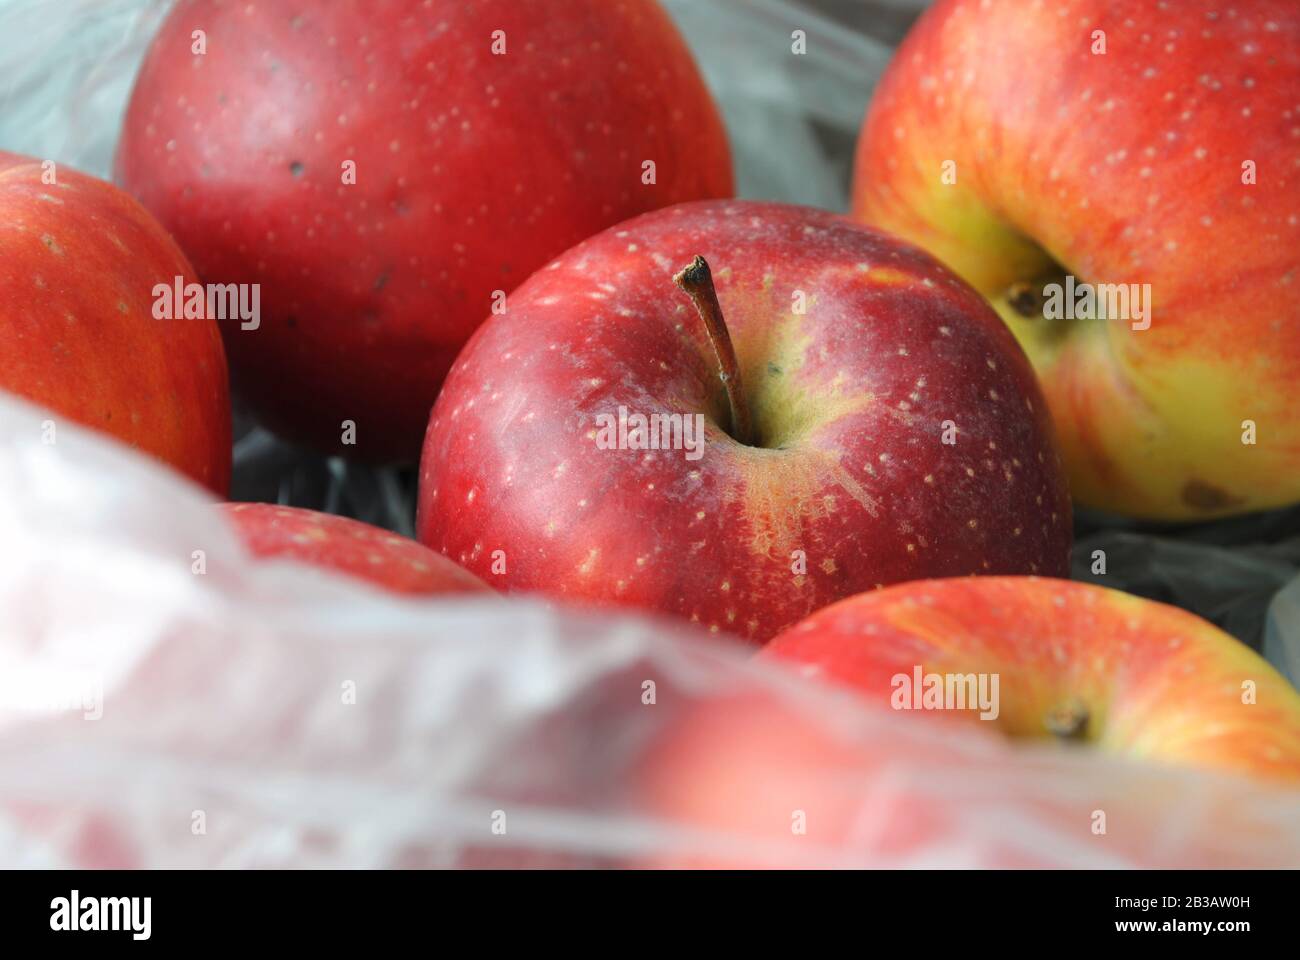 Fresh natural organic red apples in a polyethylene plastic transparent clear white bag from supermarket Stock Photo